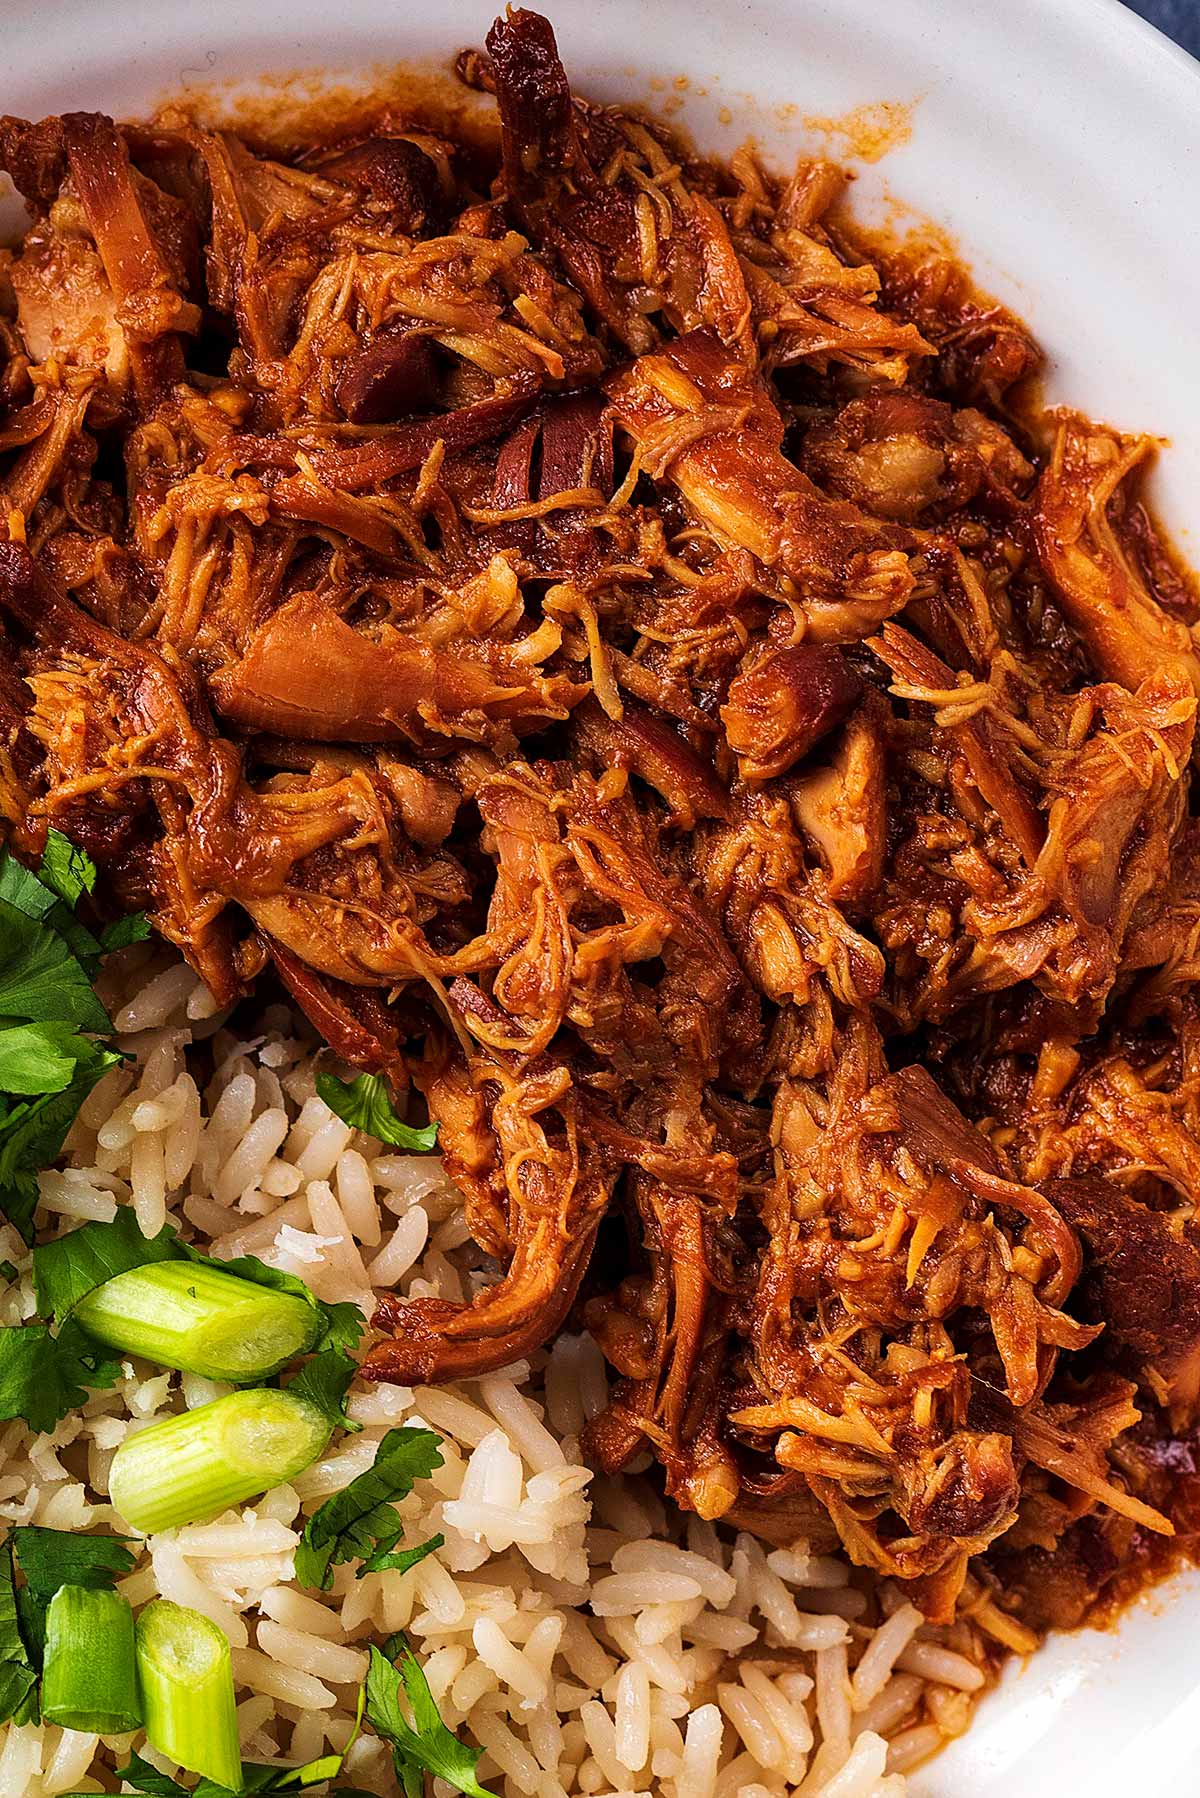 Shredded chicken on a plate next to some rice and spring onions.